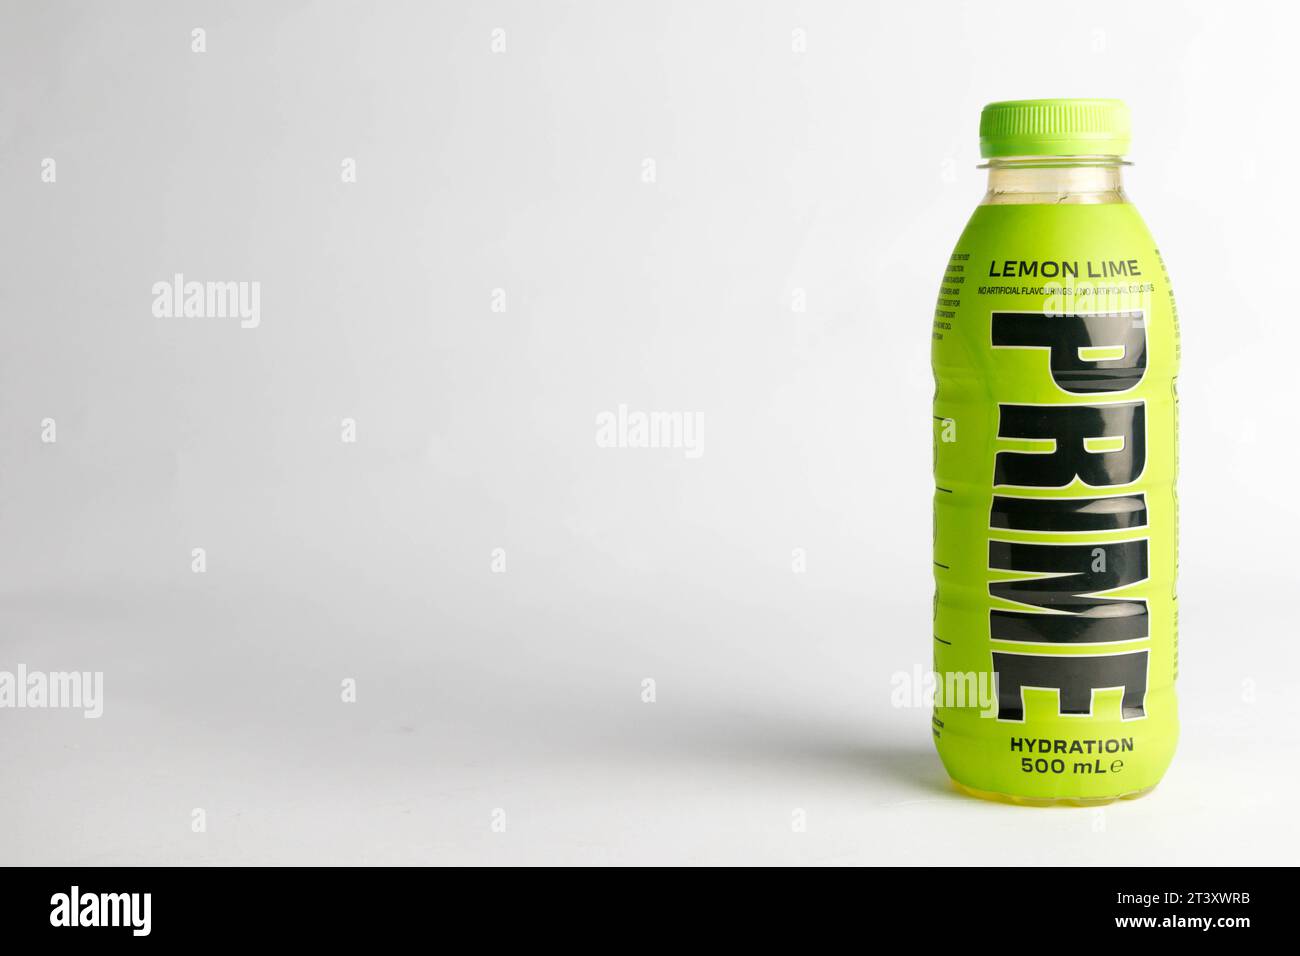 https://c8.alamy.com/comp/2T3XWRB/london-united-kingdom-18th-october-2023-a-bottle-of-lemon-lime-prime-hydration-drink-promoted-by-youtubers-logan-paul-and-ksi-2T3XWRB.jpg